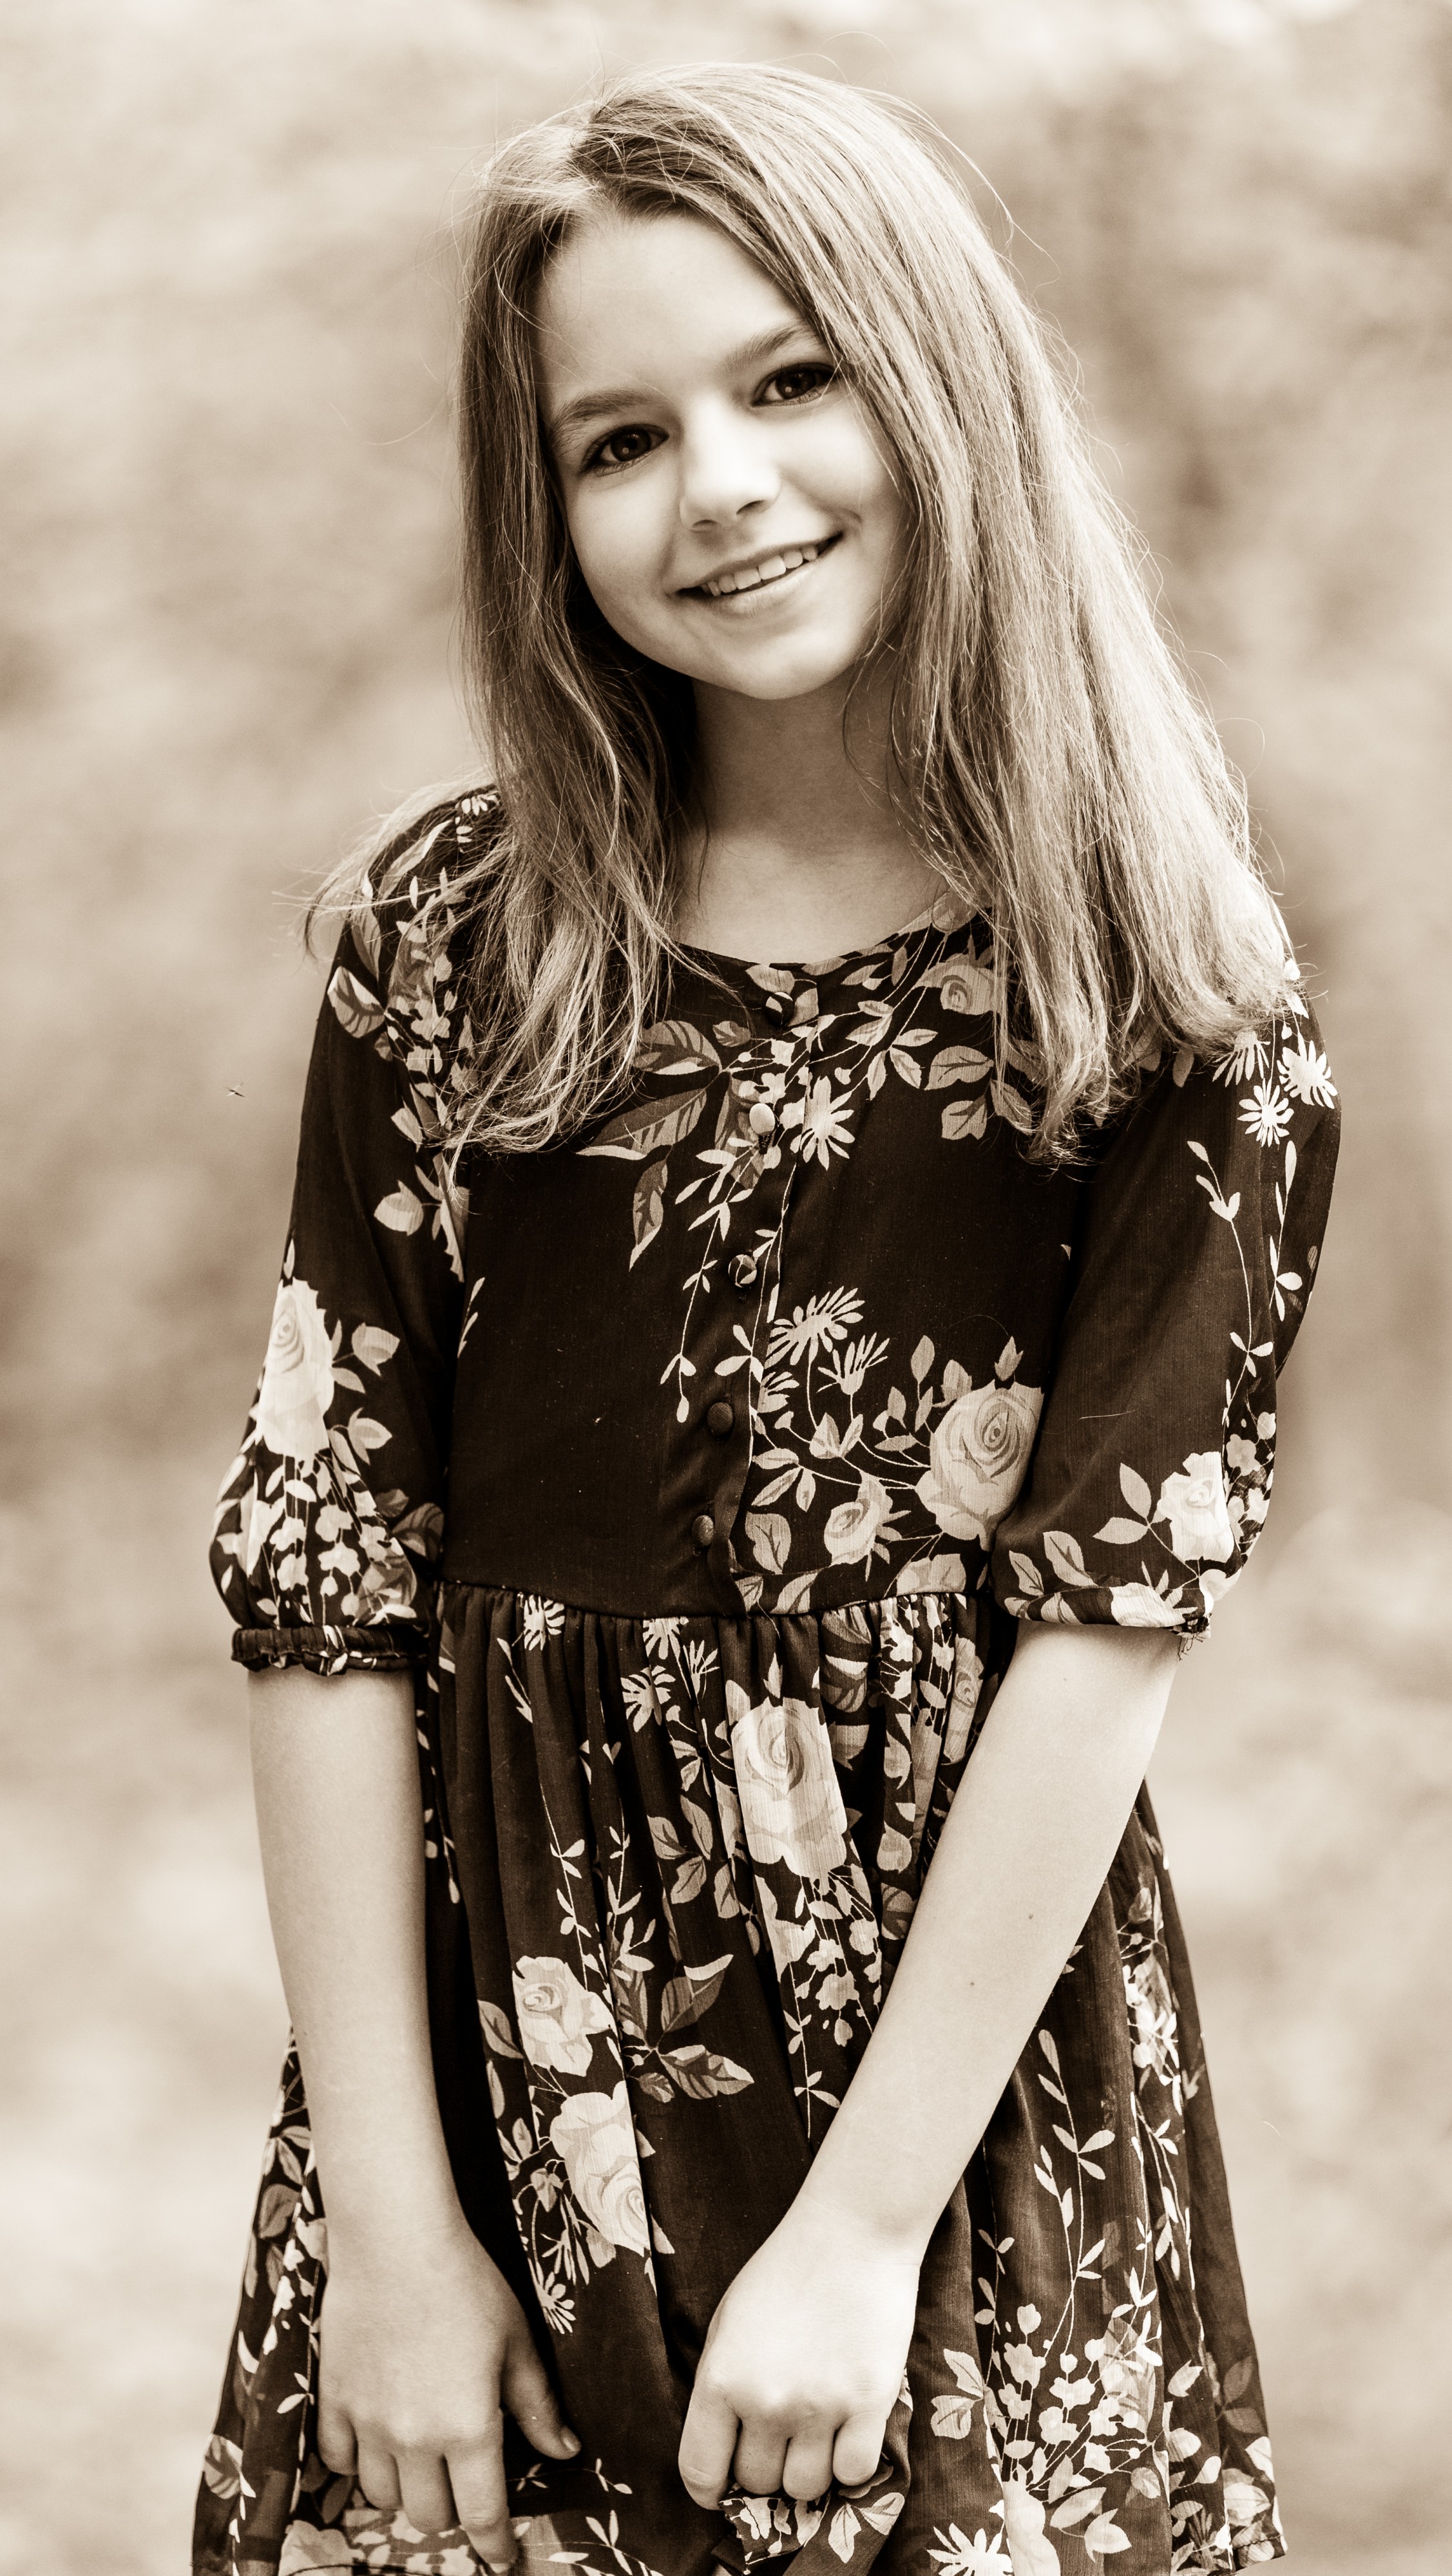 a cute 12-year-old girl photographed in May 2015, picture 2